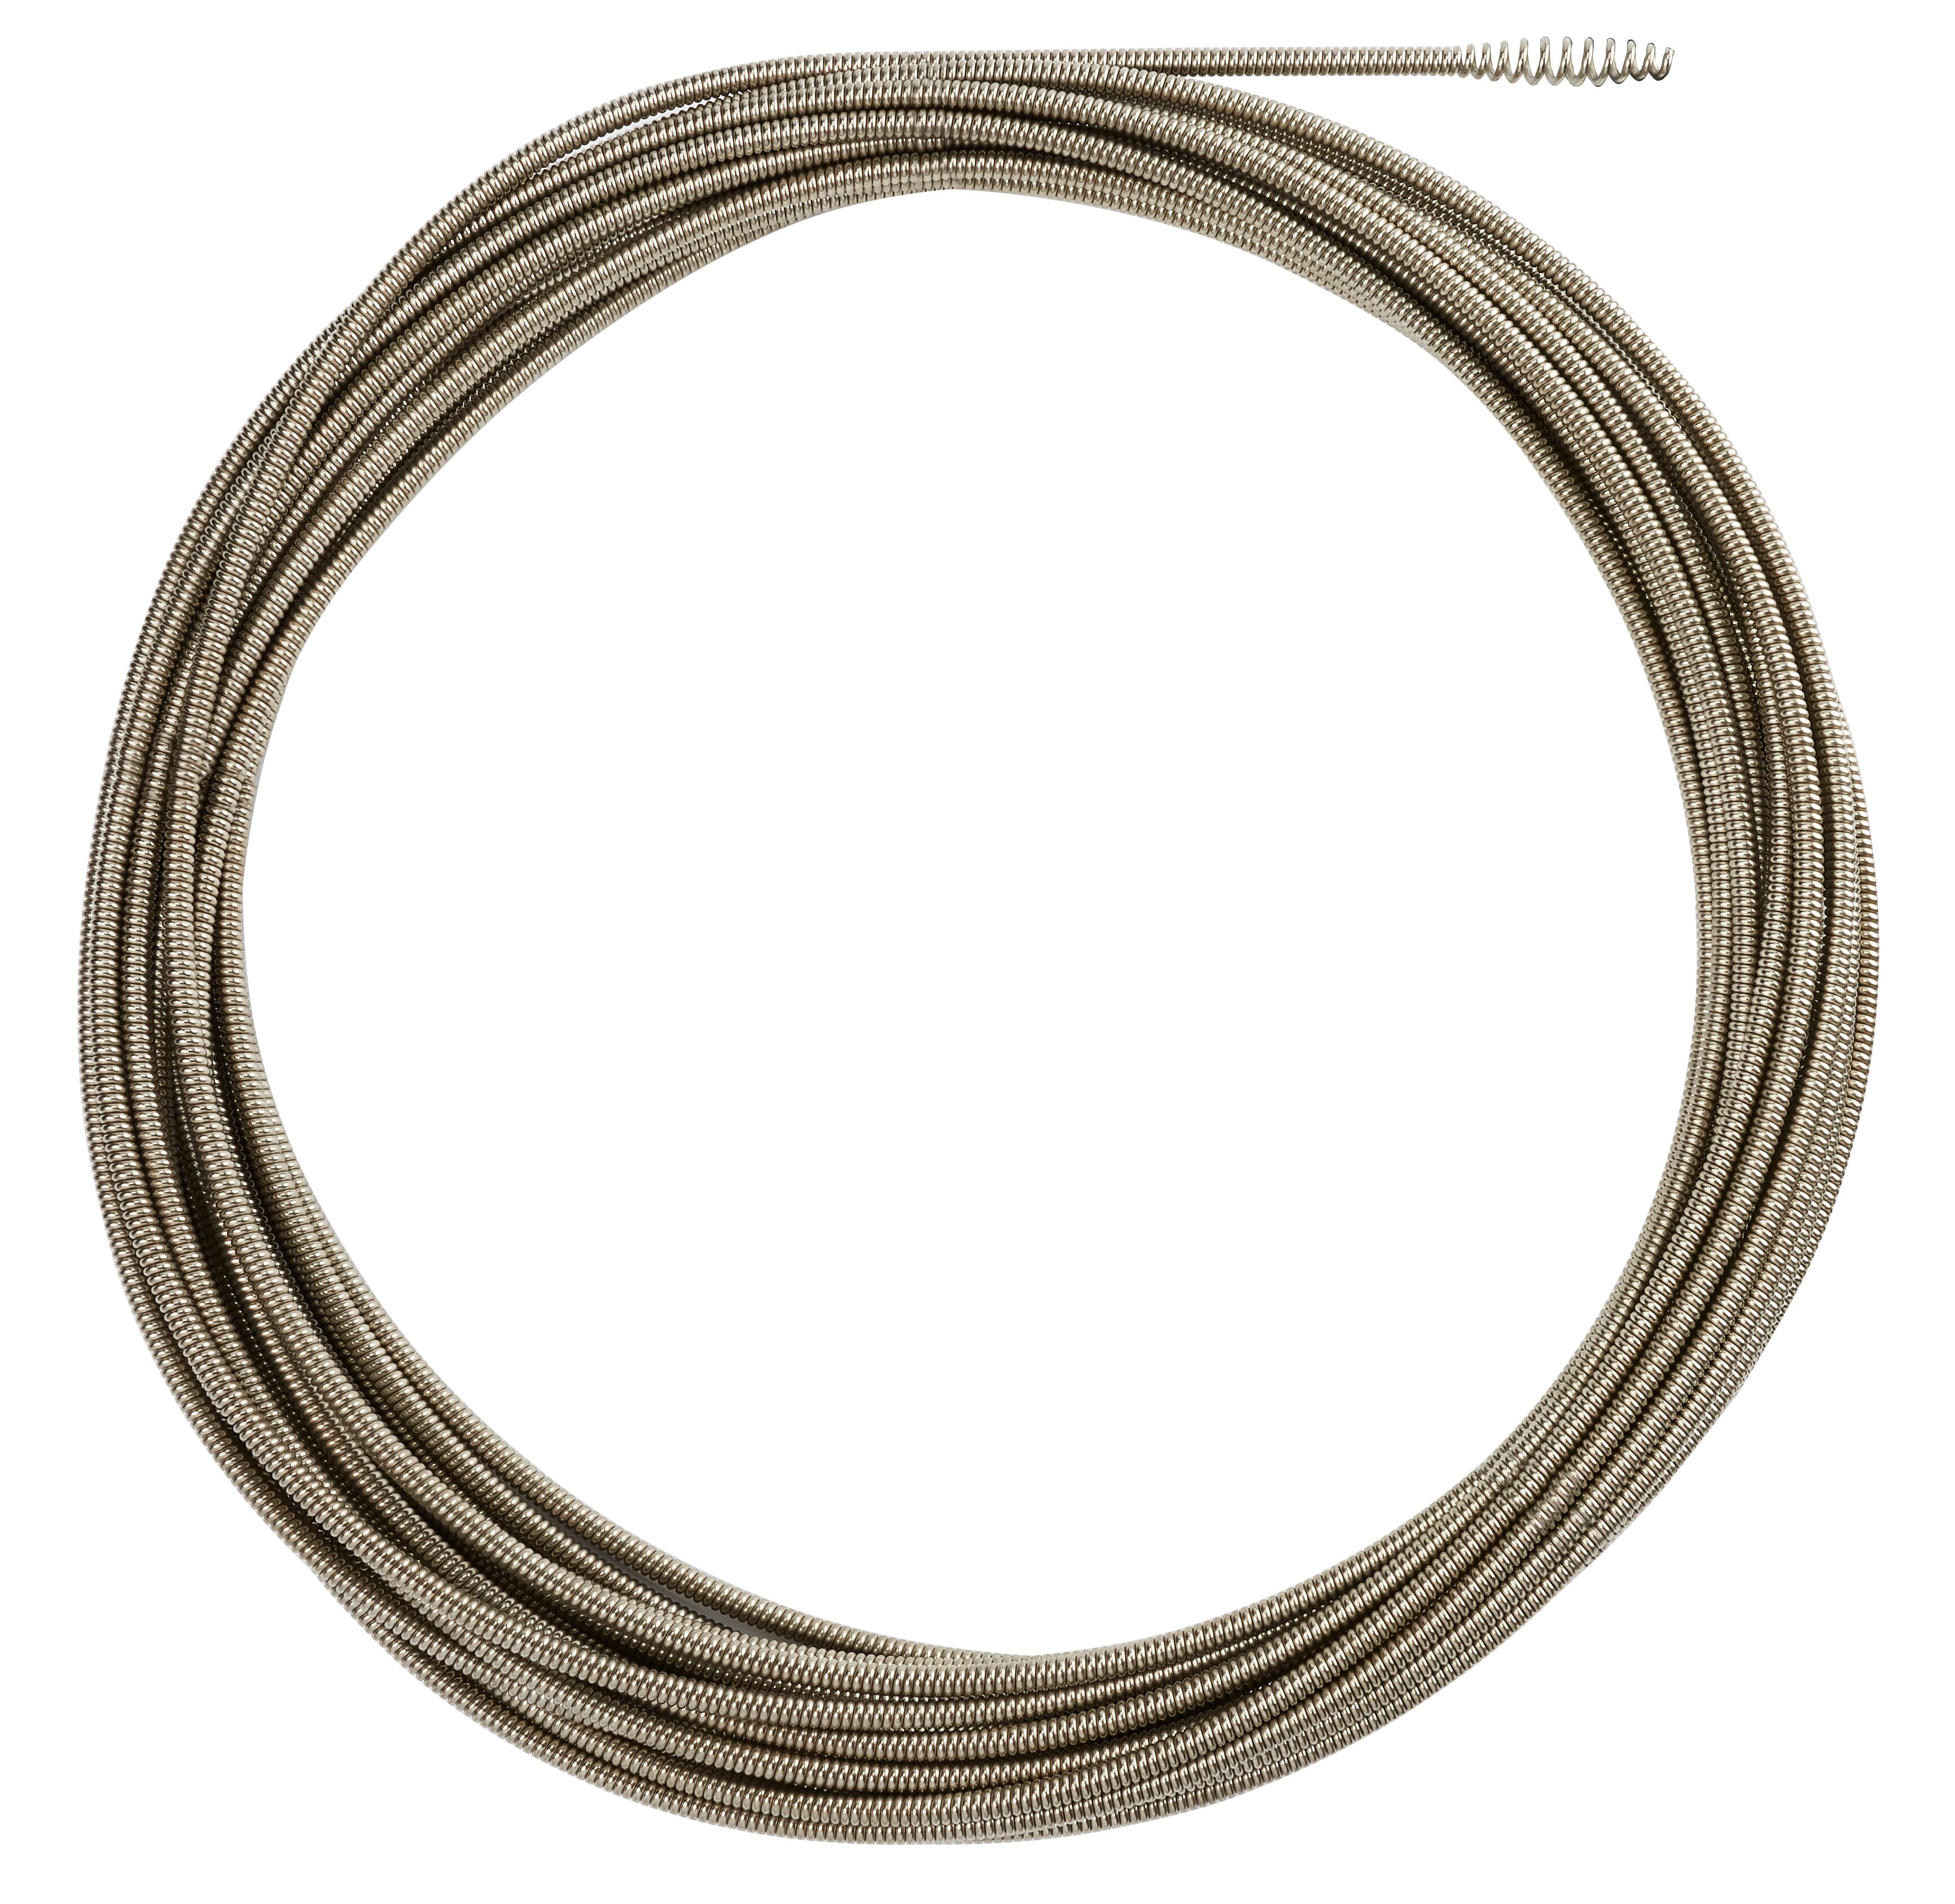 Milwaukee® 48-53-2772 Inner Core Bulb Head Drain Cleaning Cable, 5/16 in, Steel, For Use With Drain Cleaning Machines, 1-1/4 to 2-1/2 in Drain Line